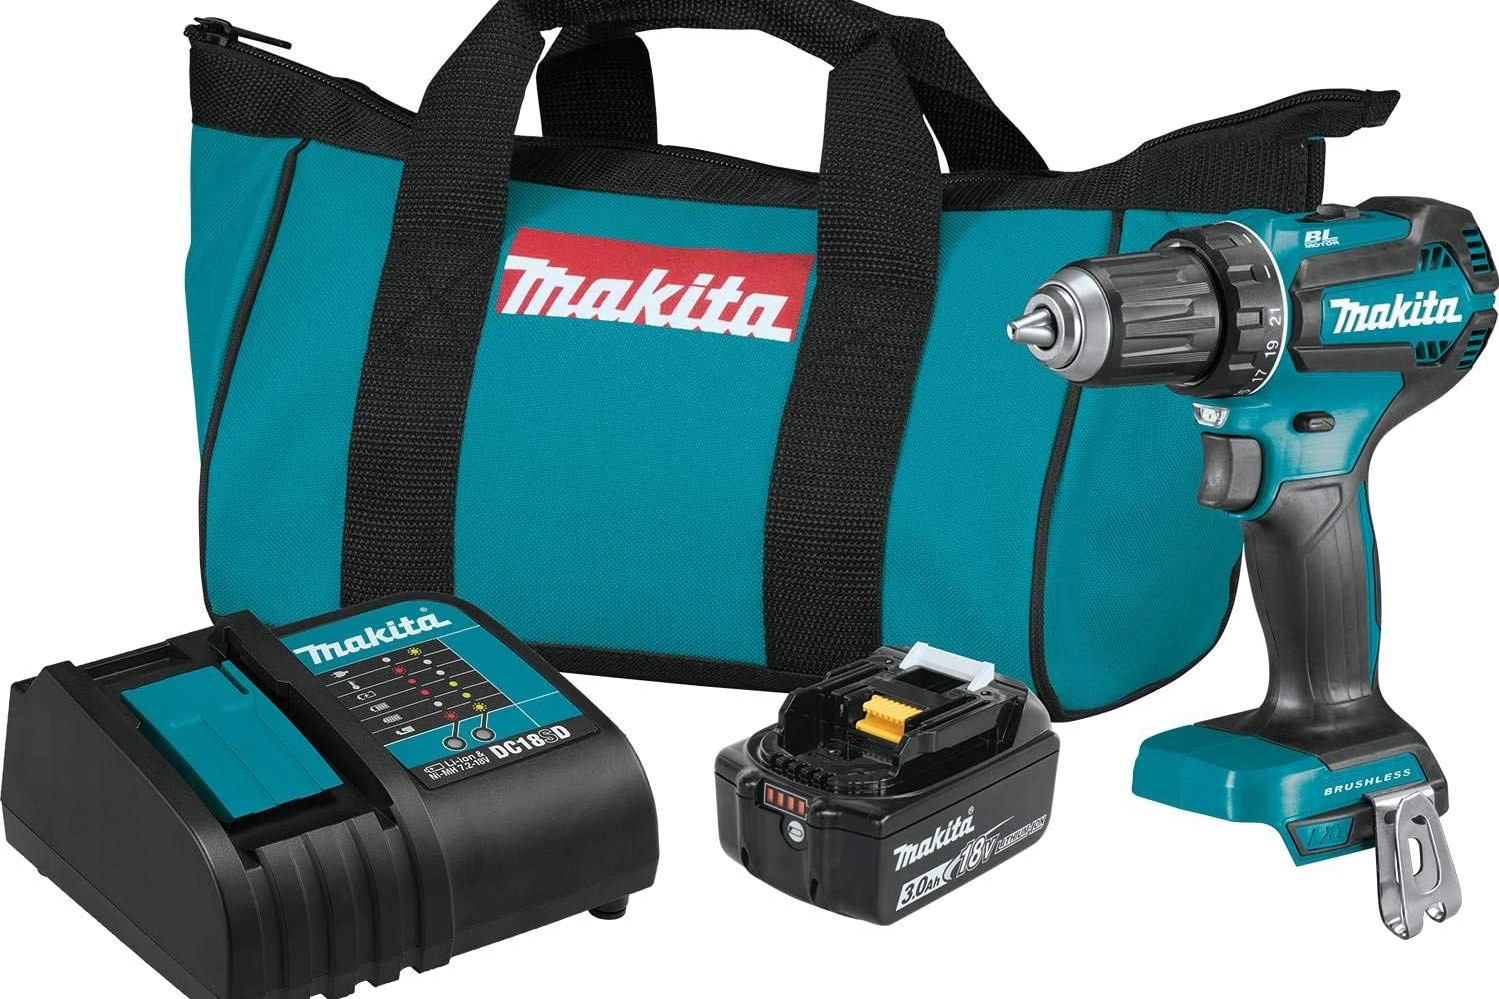 Get A 4 Piece Black & Decker Drill Kit For Just $99 This Cyber